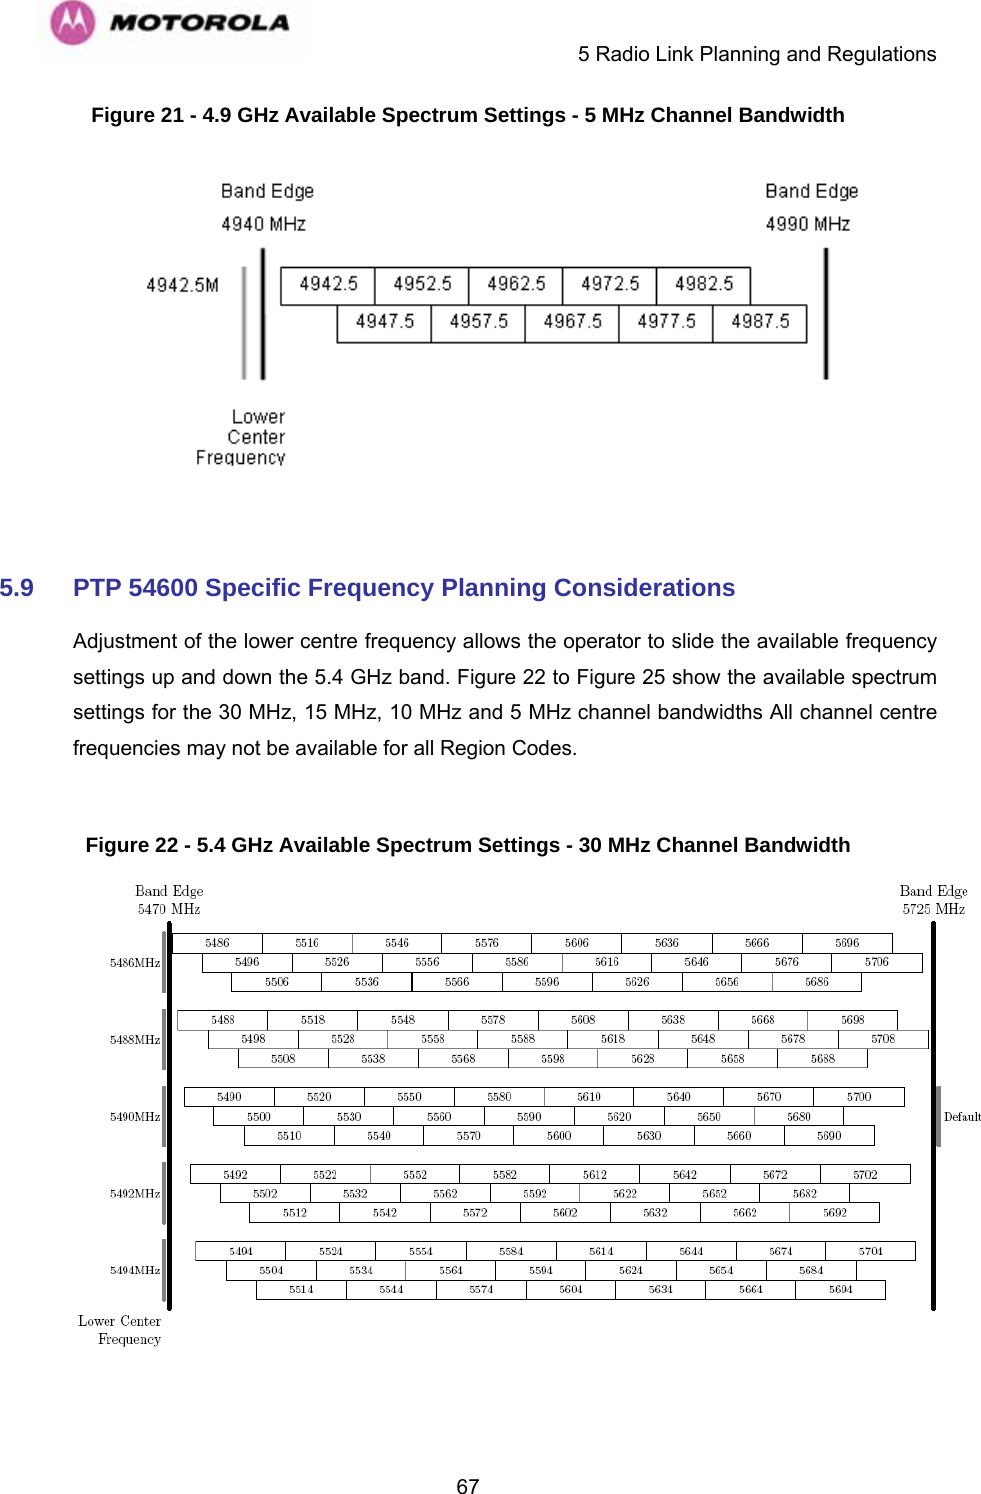     5 Radio Link Planning and Regulations  67Figure 21 - 4.9 GHz Available Spectrum Settings - 5 MHz Channel Bandwidth   5.9  PTP 54600 Specific Frequency Planning Considerations Adjustment of the lower centre frequency allows the operator to slide the available frequency settings up and down the 5.4 GHz band. Figure 22 to Figure 25 show the available spectrum settings for the 30 MHz, 15 MHz, 10 MHz and 5 MHz channel bandwidths All channel centre frequencies may not be available for all Region Codes.  Figure 22 - 5.4 GHz Available Spectrum Settings - 30 MHz Channel Bandwidth   